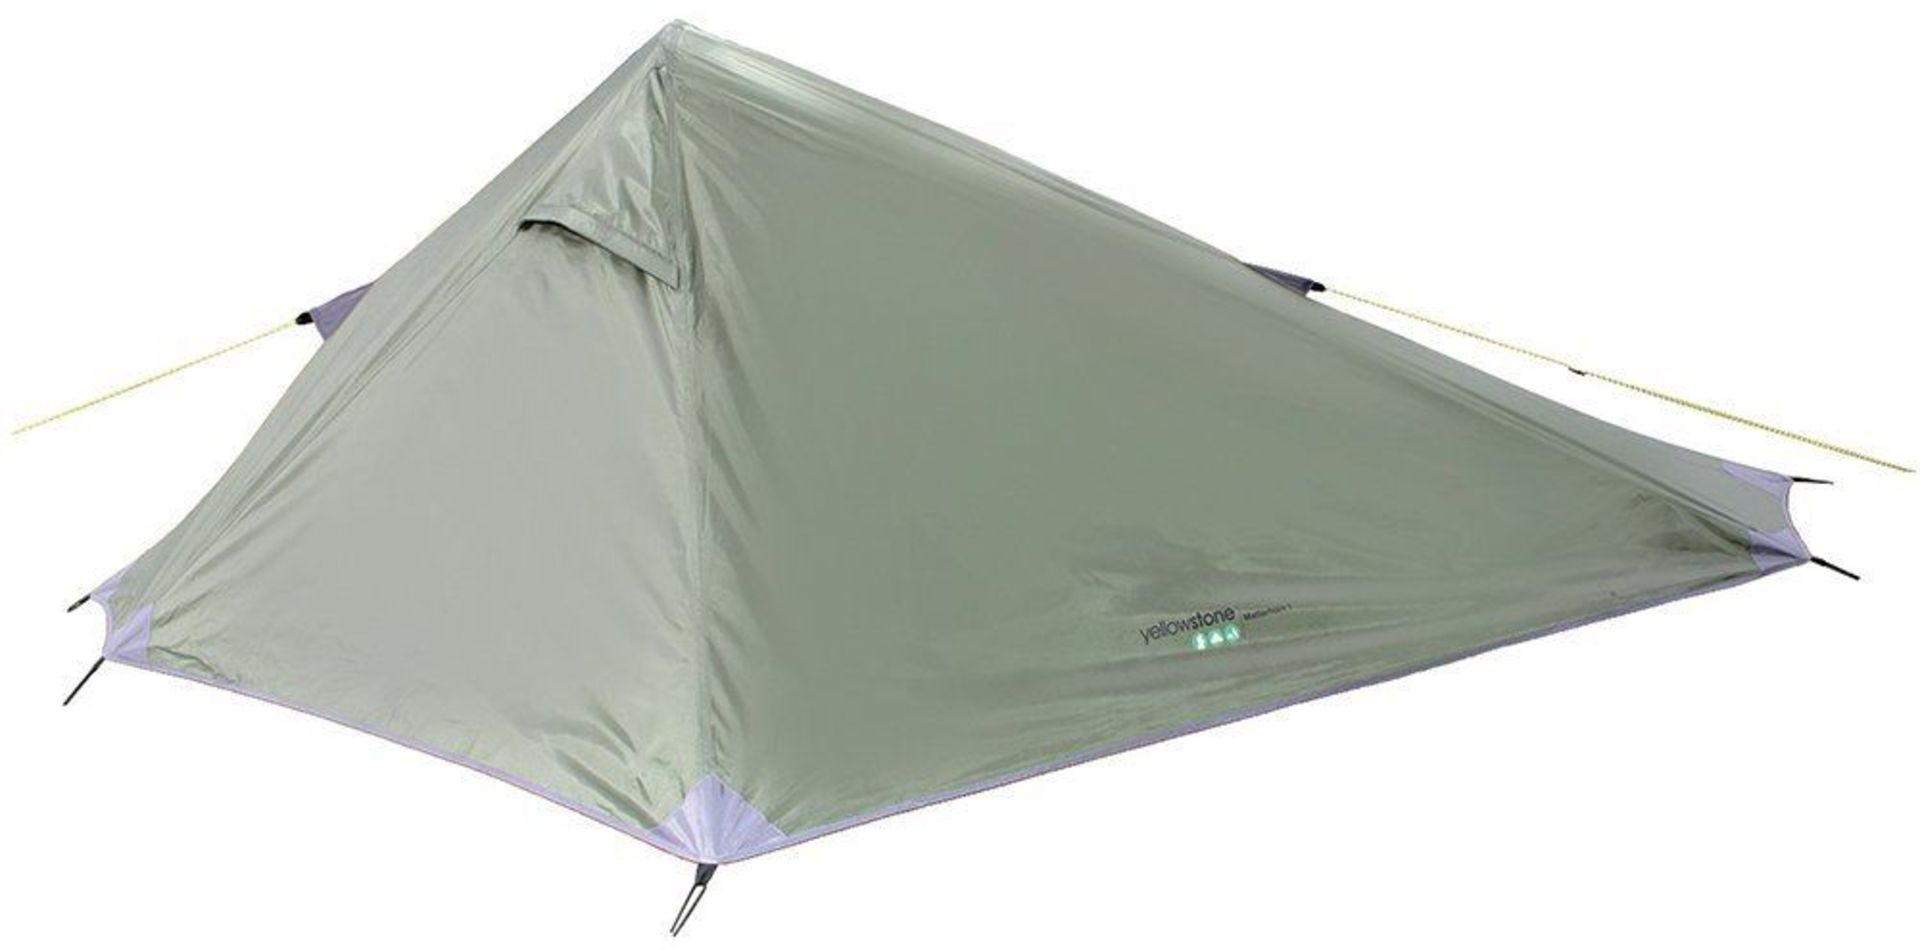 V *TRADE QTY* Brand New Two Person Lightweight Tent In Bag - Easy to Pitch - Sewn in Groundsheet - - Image 2 of 2